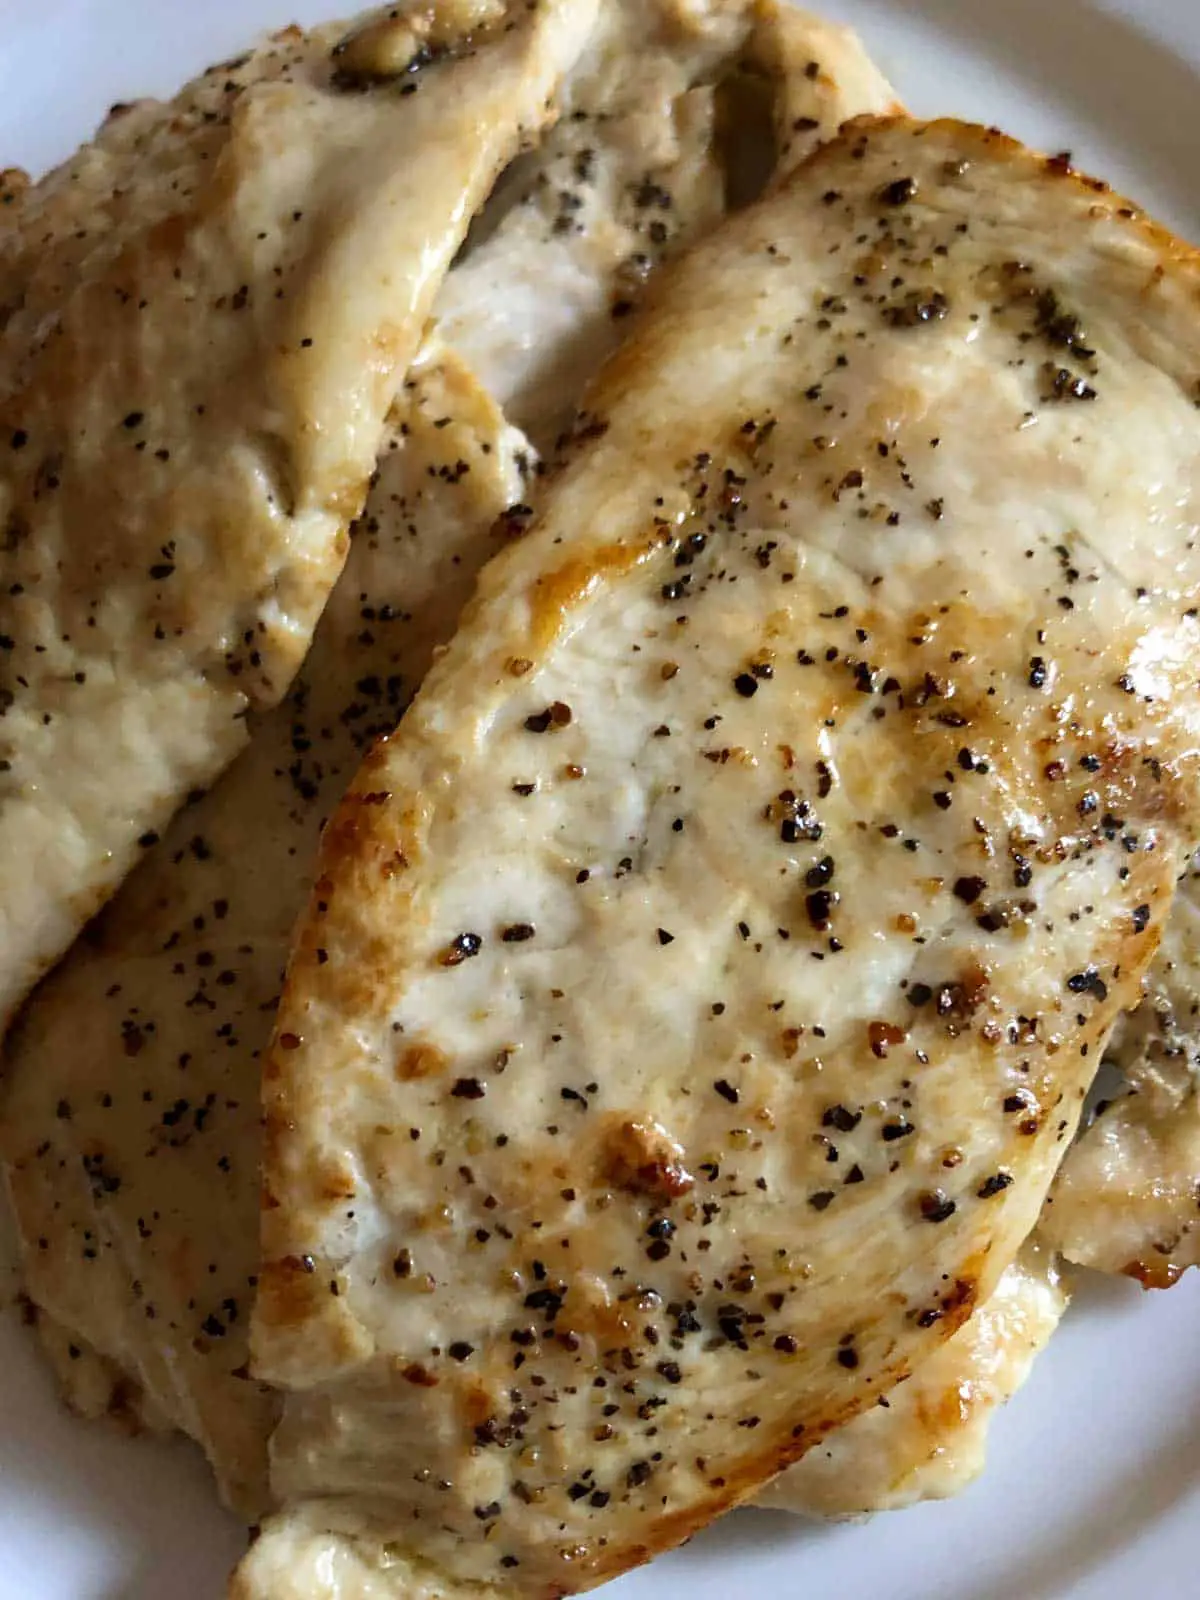 Chicken scallopini or thin slices of cooked chicken seasoned with salt and pepper on a white plate.